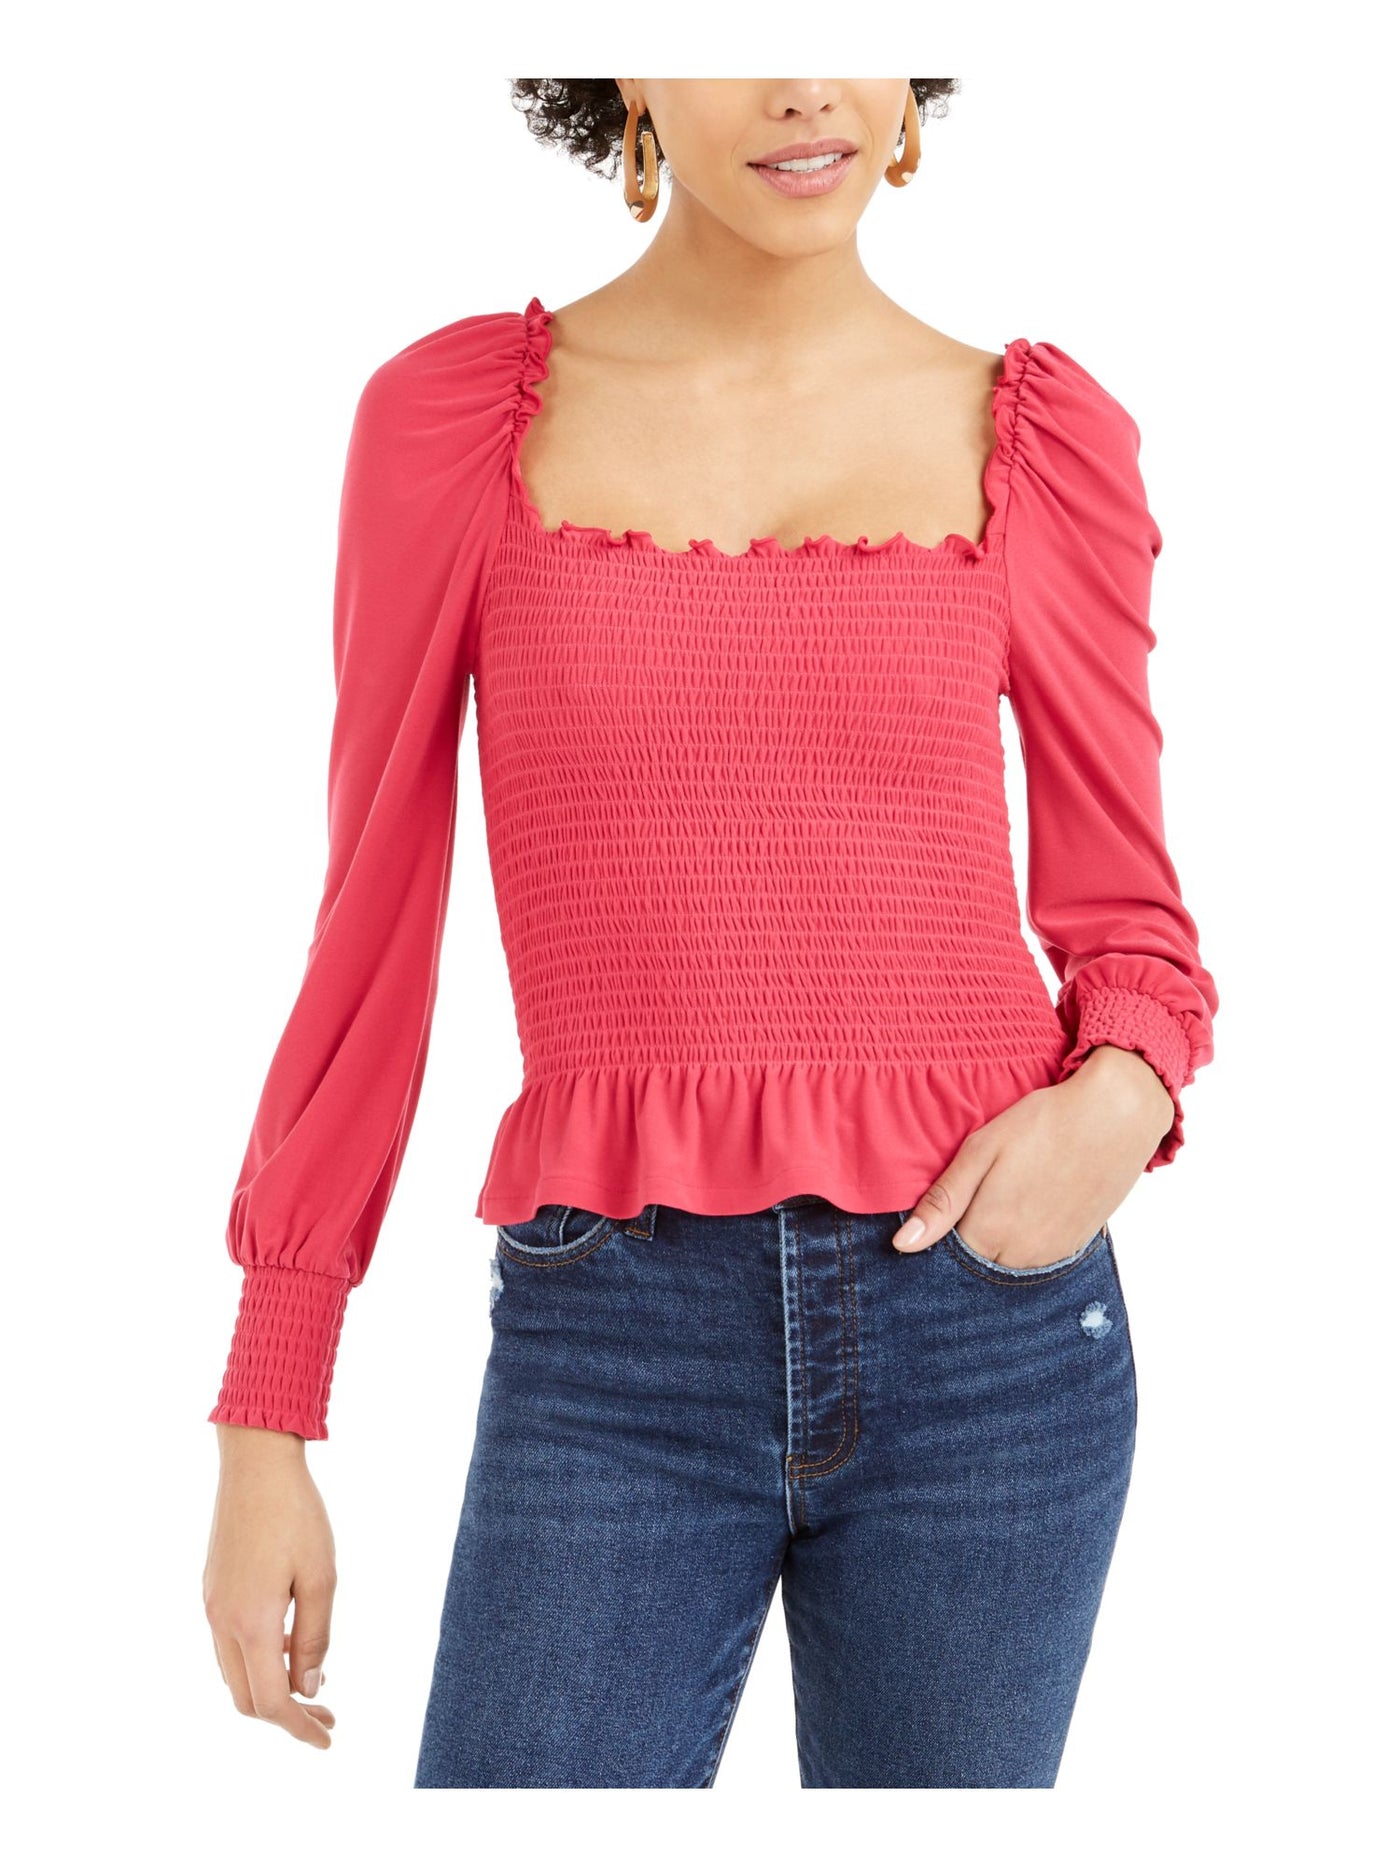 BAR III Womens Pink Ribbed Ruffled Long Sleeve Square Neck Blouse L